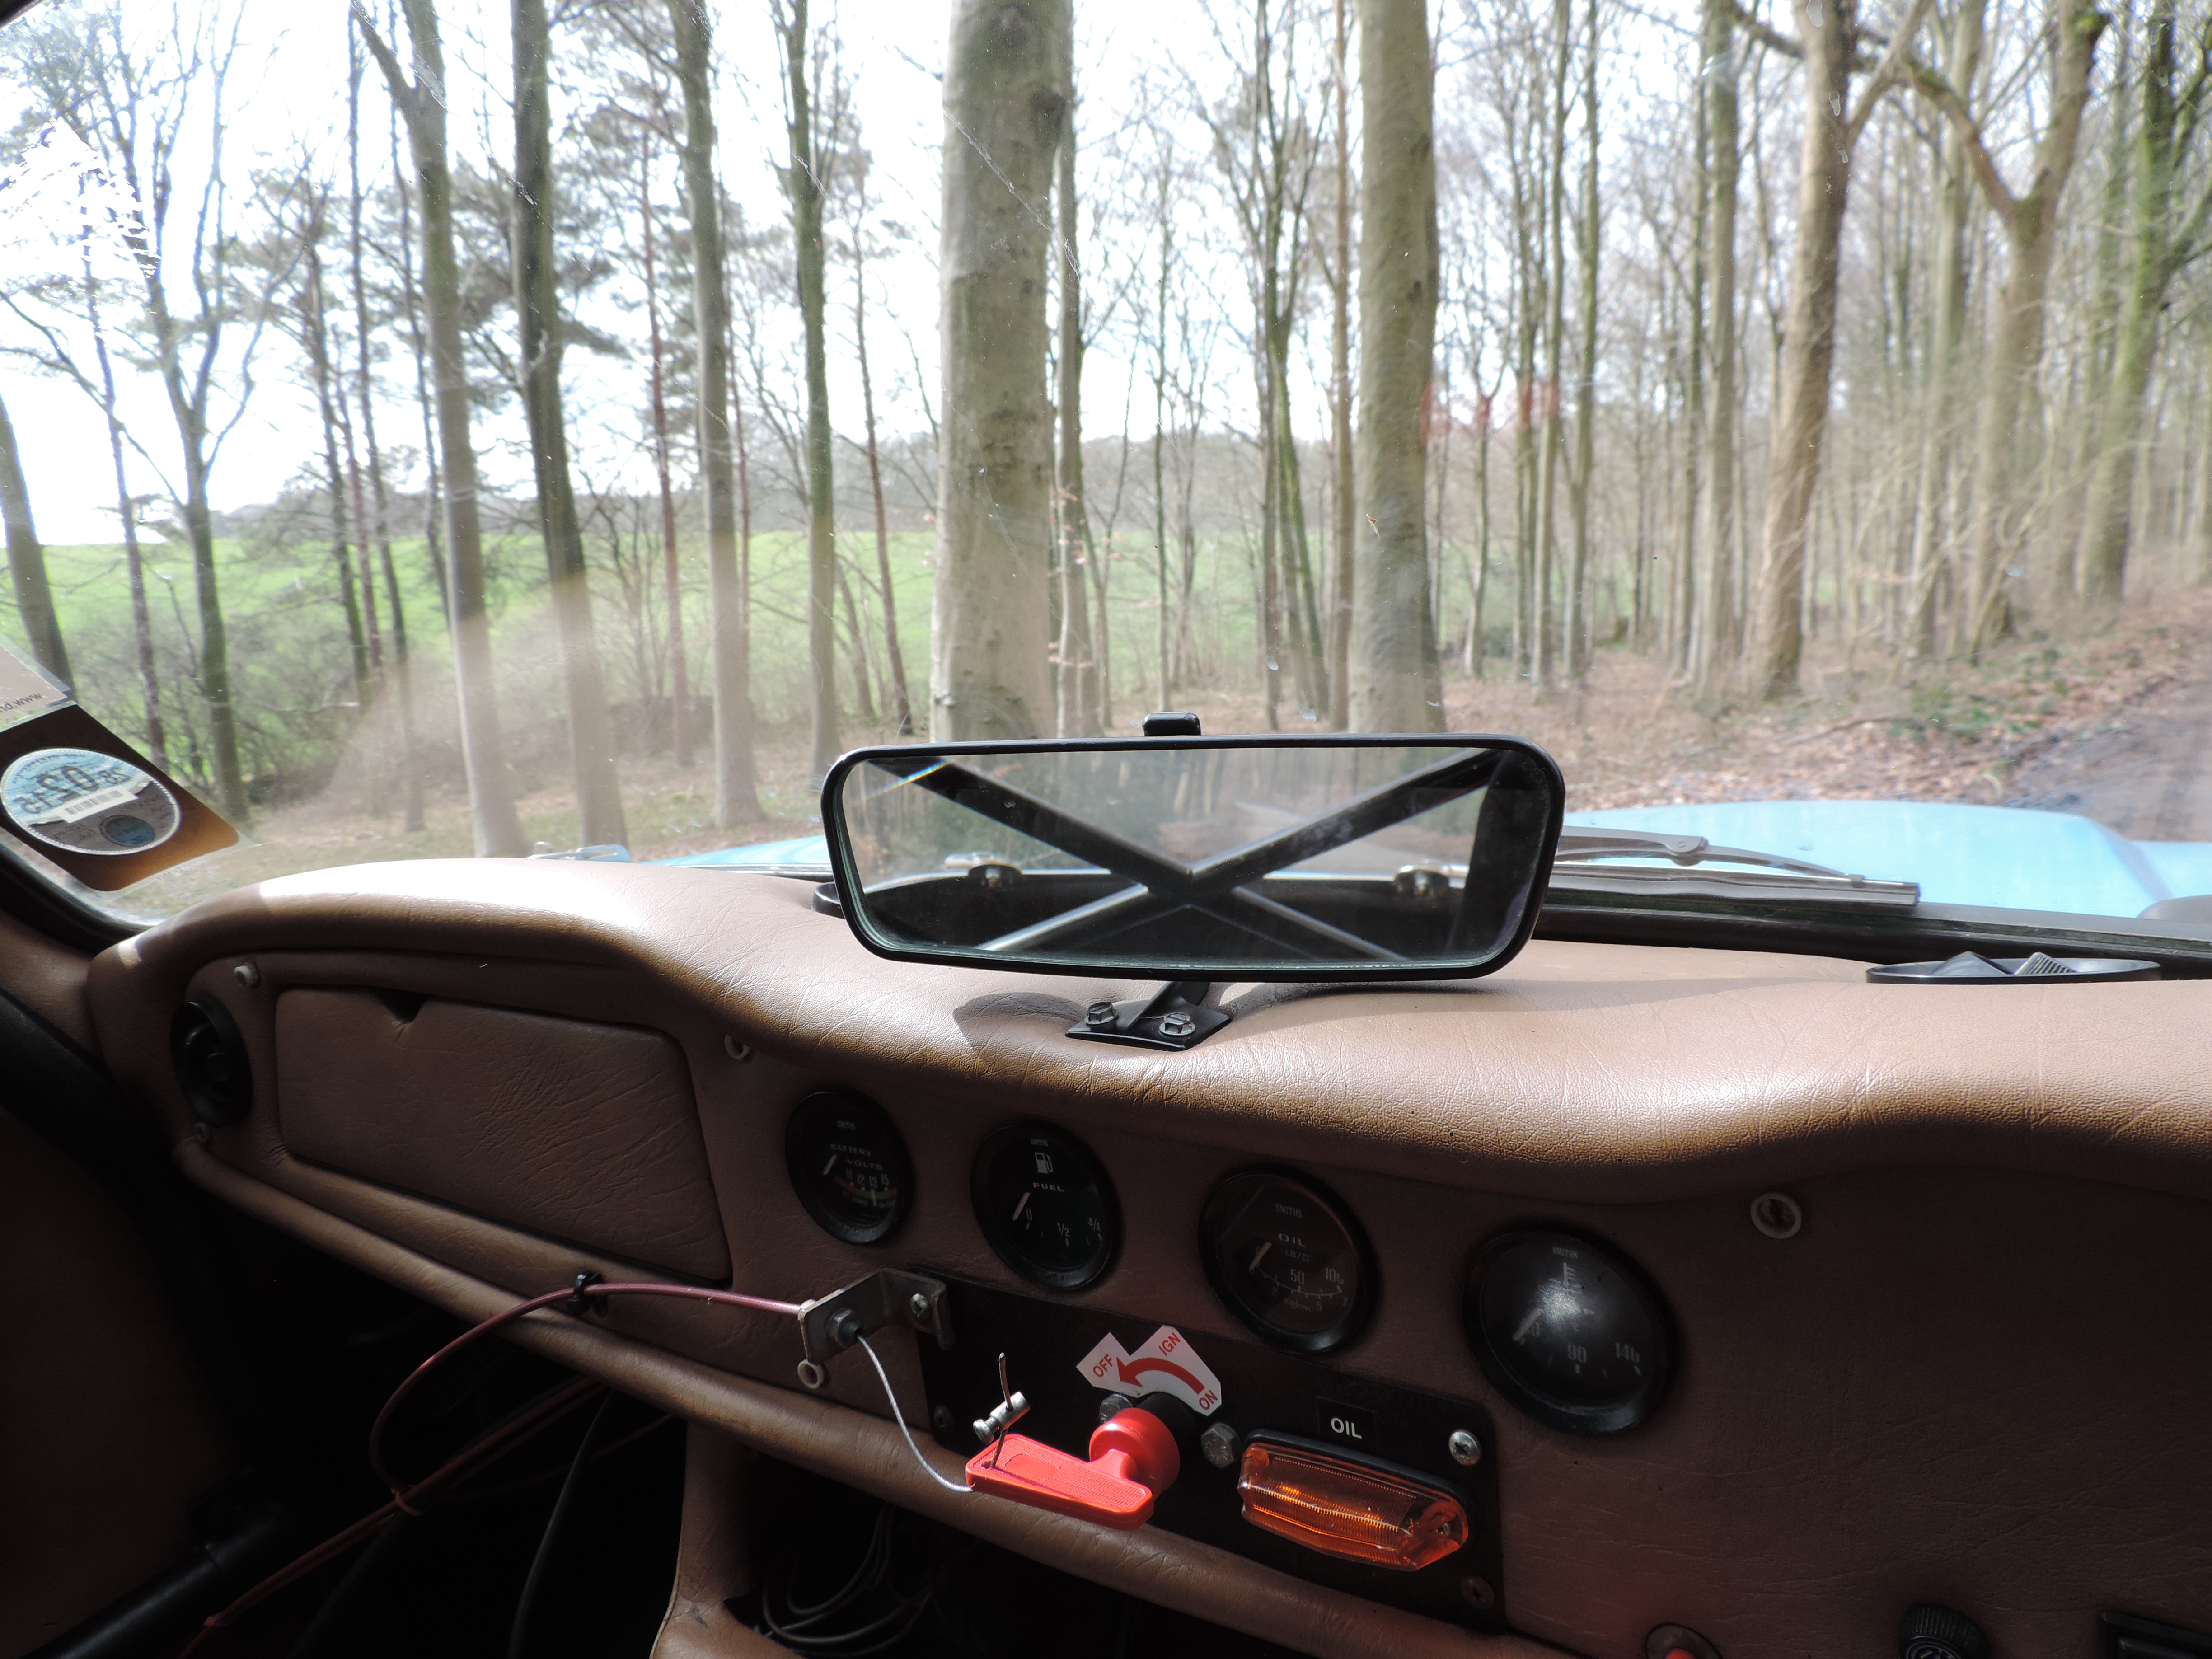 Roll cage in rear view mirror